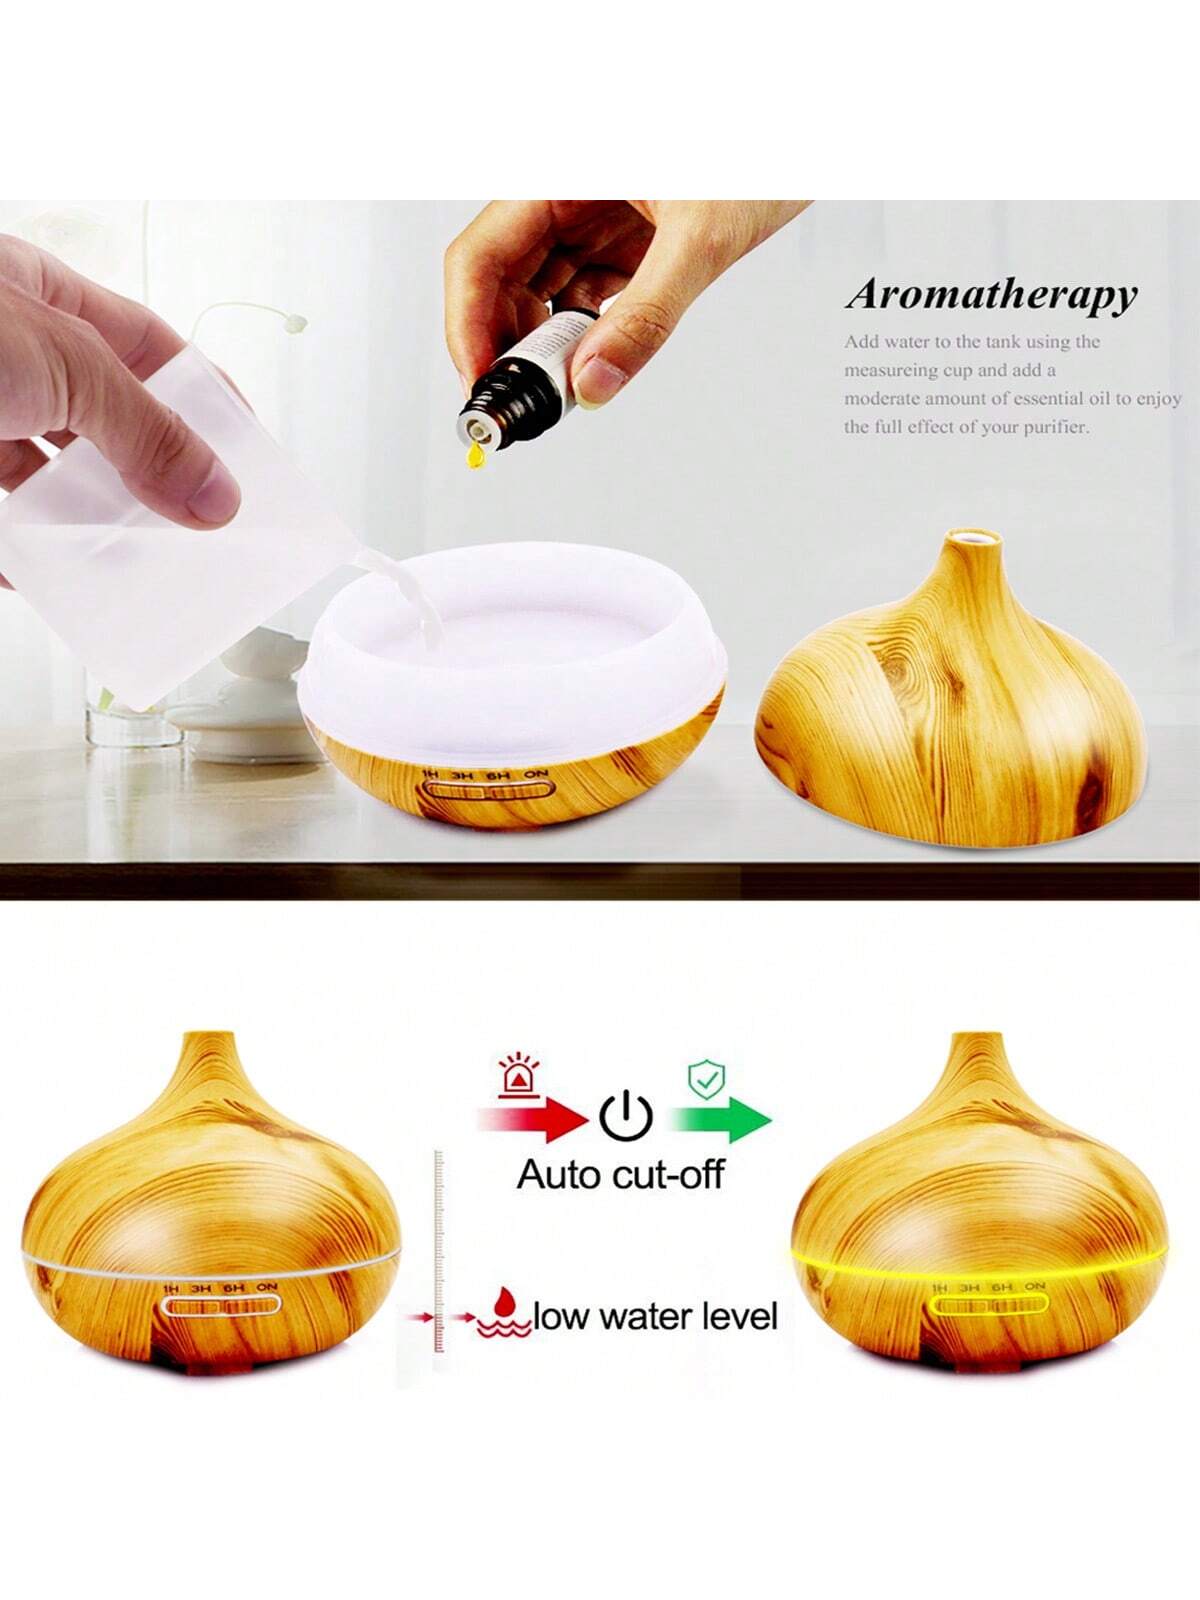 1pc Humidifier300ml Premium, Essential Oil Diffuser with Remote Control, 5 in 1 Ultrasonic Aromatherapy Fragrant Oil Humidifier Vaporizer, Timer and Auto-Off Safety Switch-wood color-5